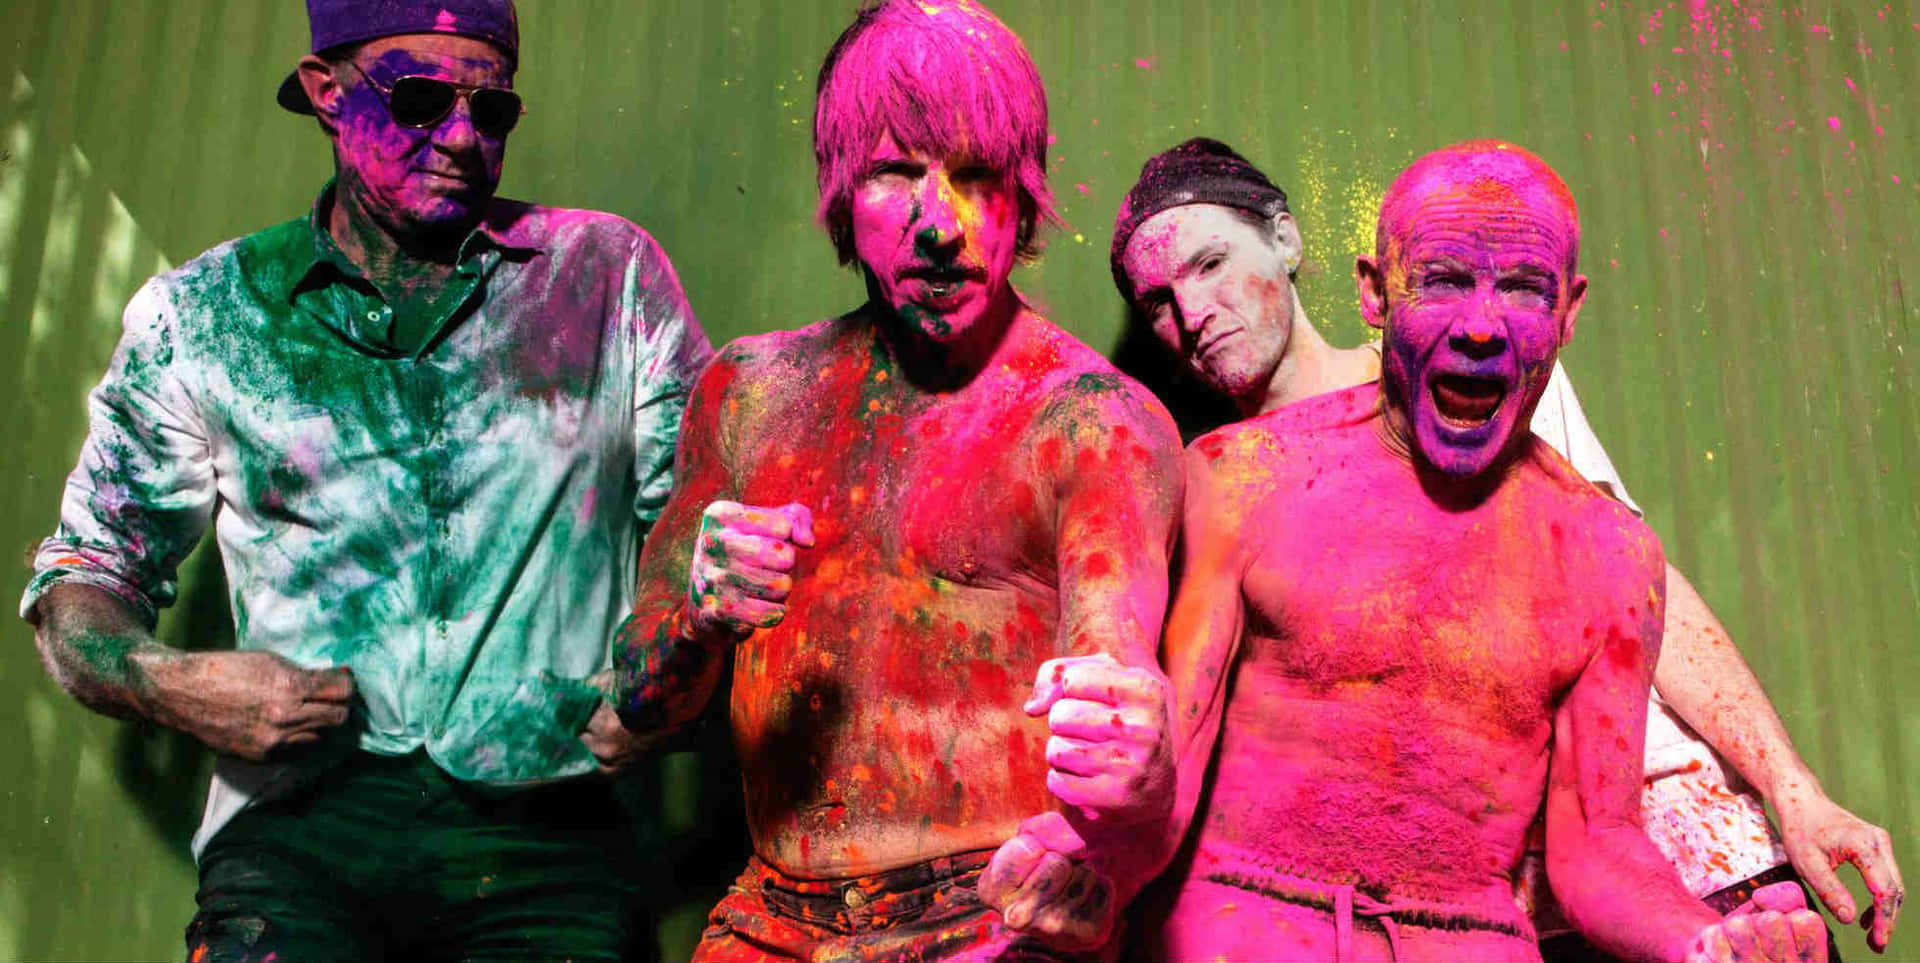 Holi Festival - A Group Of Men With Paint On Their Faces Wallpaper